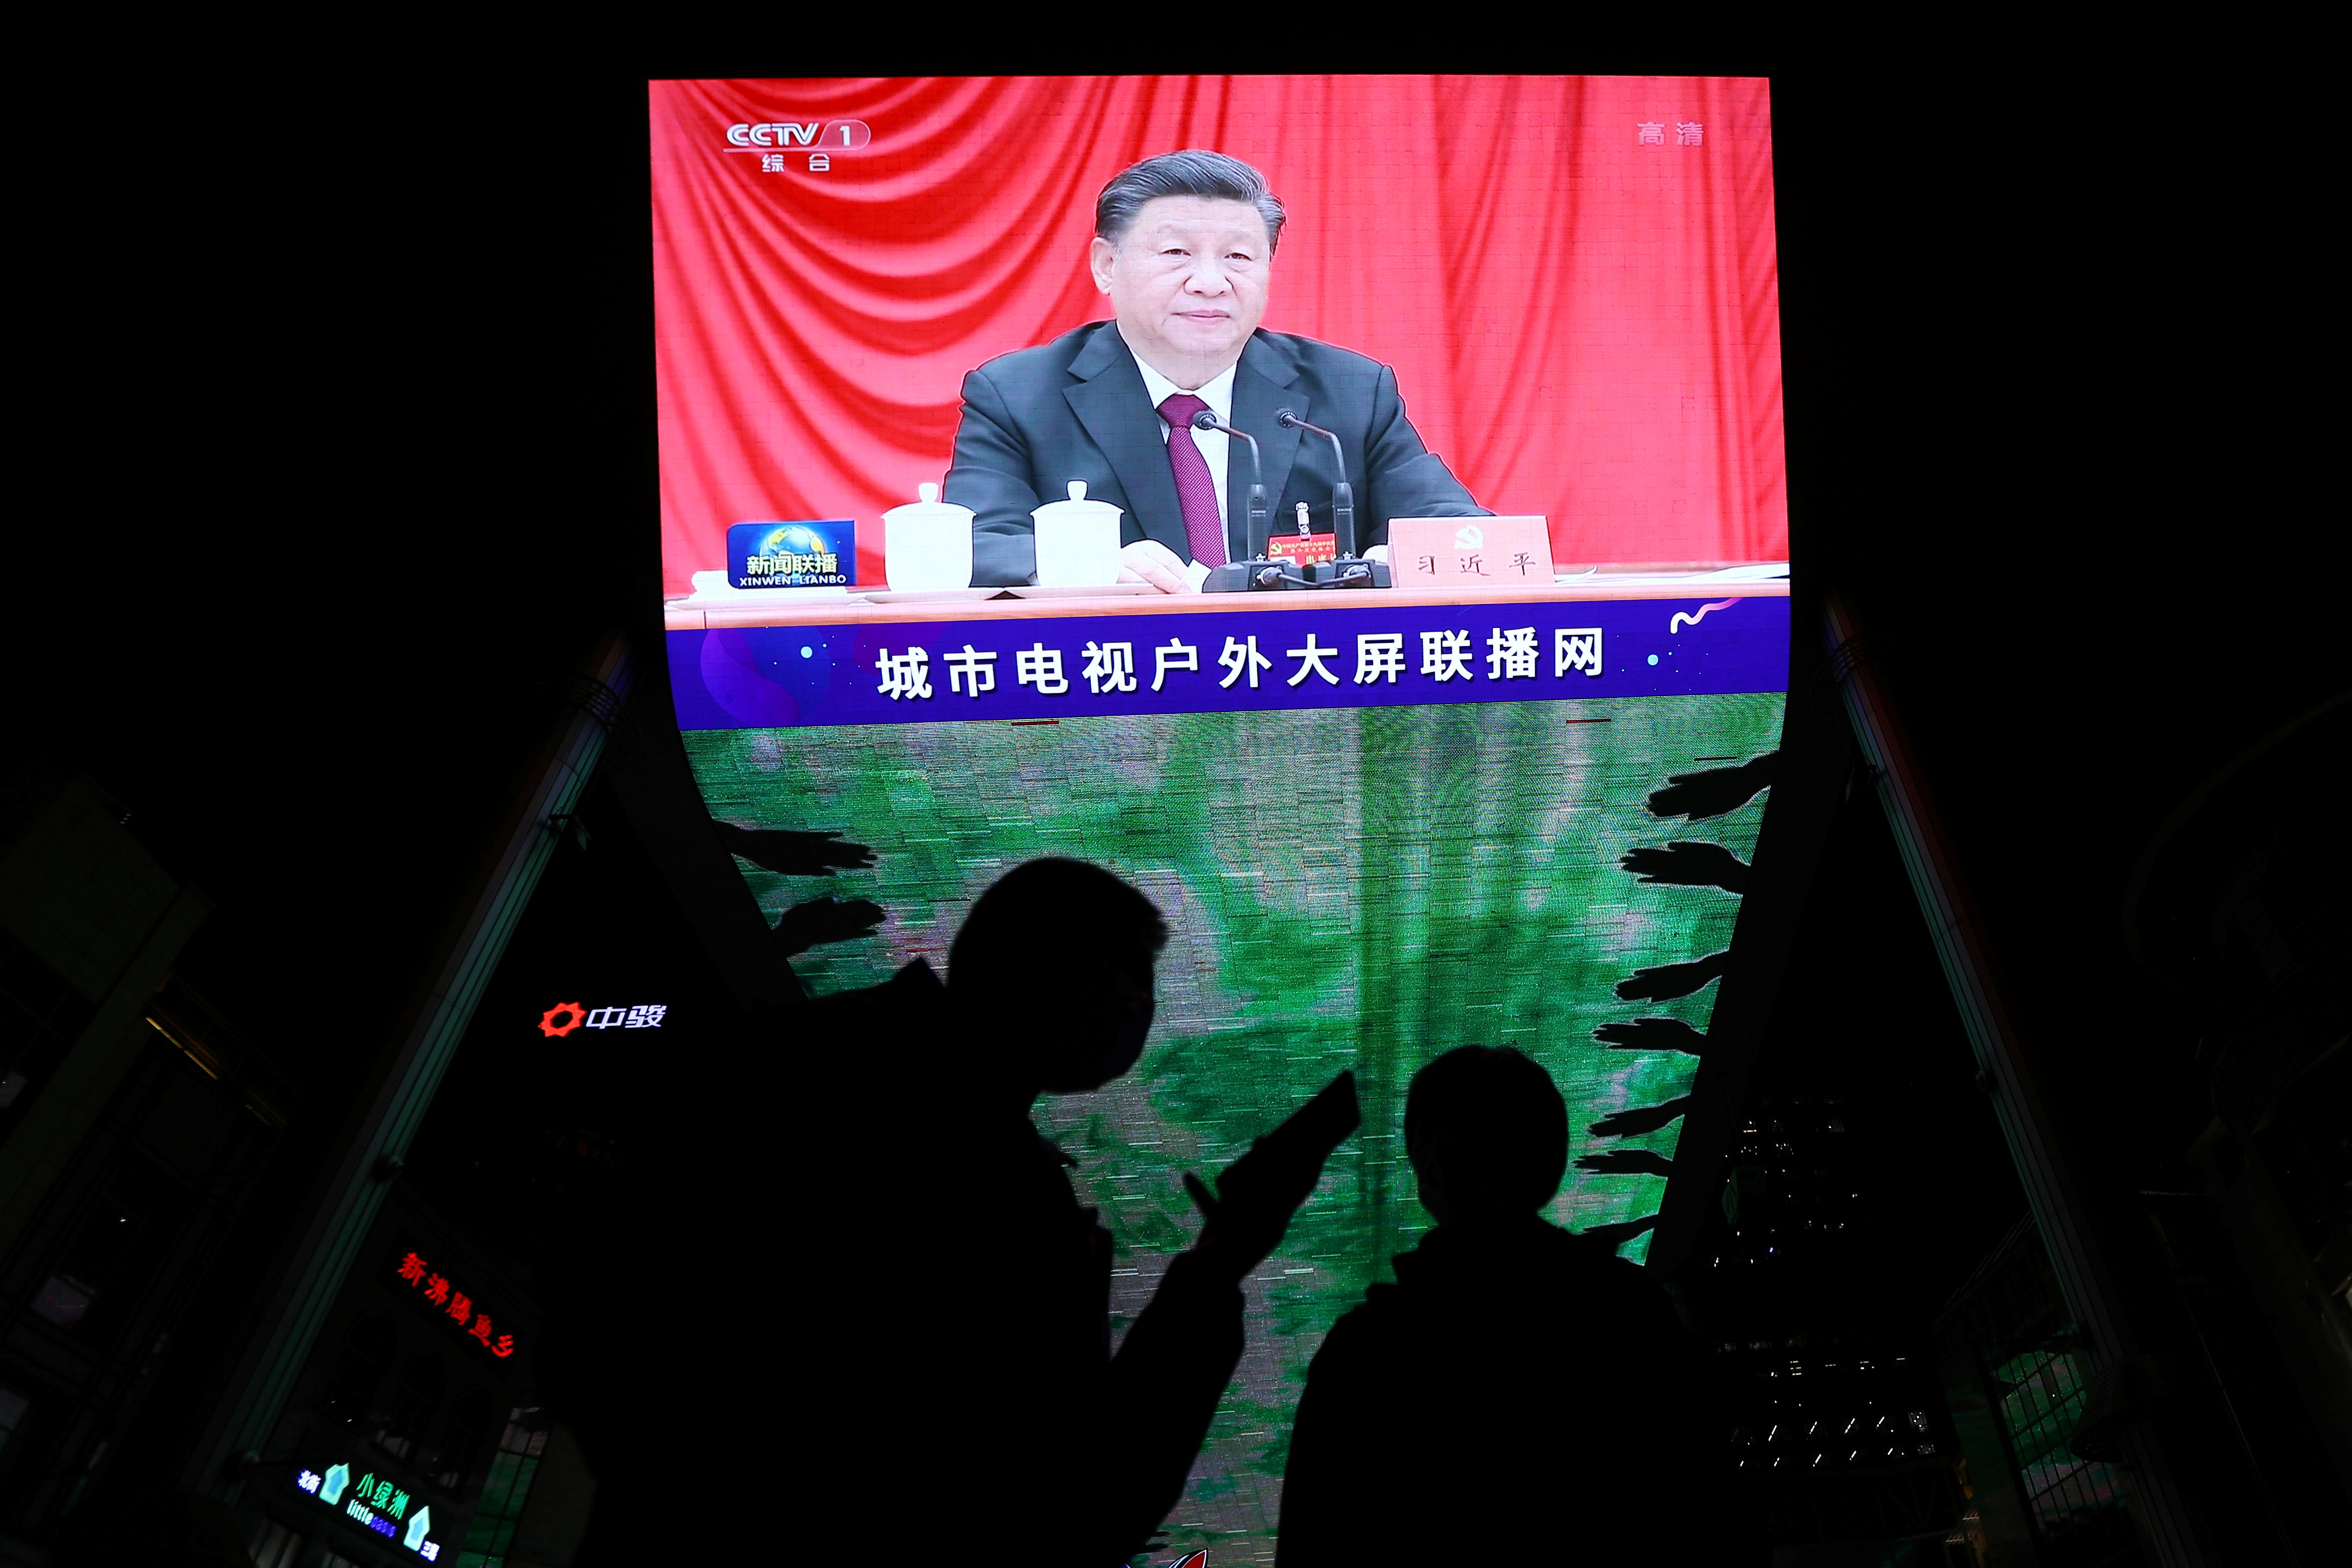 A giant screen shows Chinese President Xi Jinping attending the sixth plenary session of the 19th Central Committee of the Communist Party of China (CPC), in Beijing, China November 11, 2021. REUTERS/Tingshu Wang